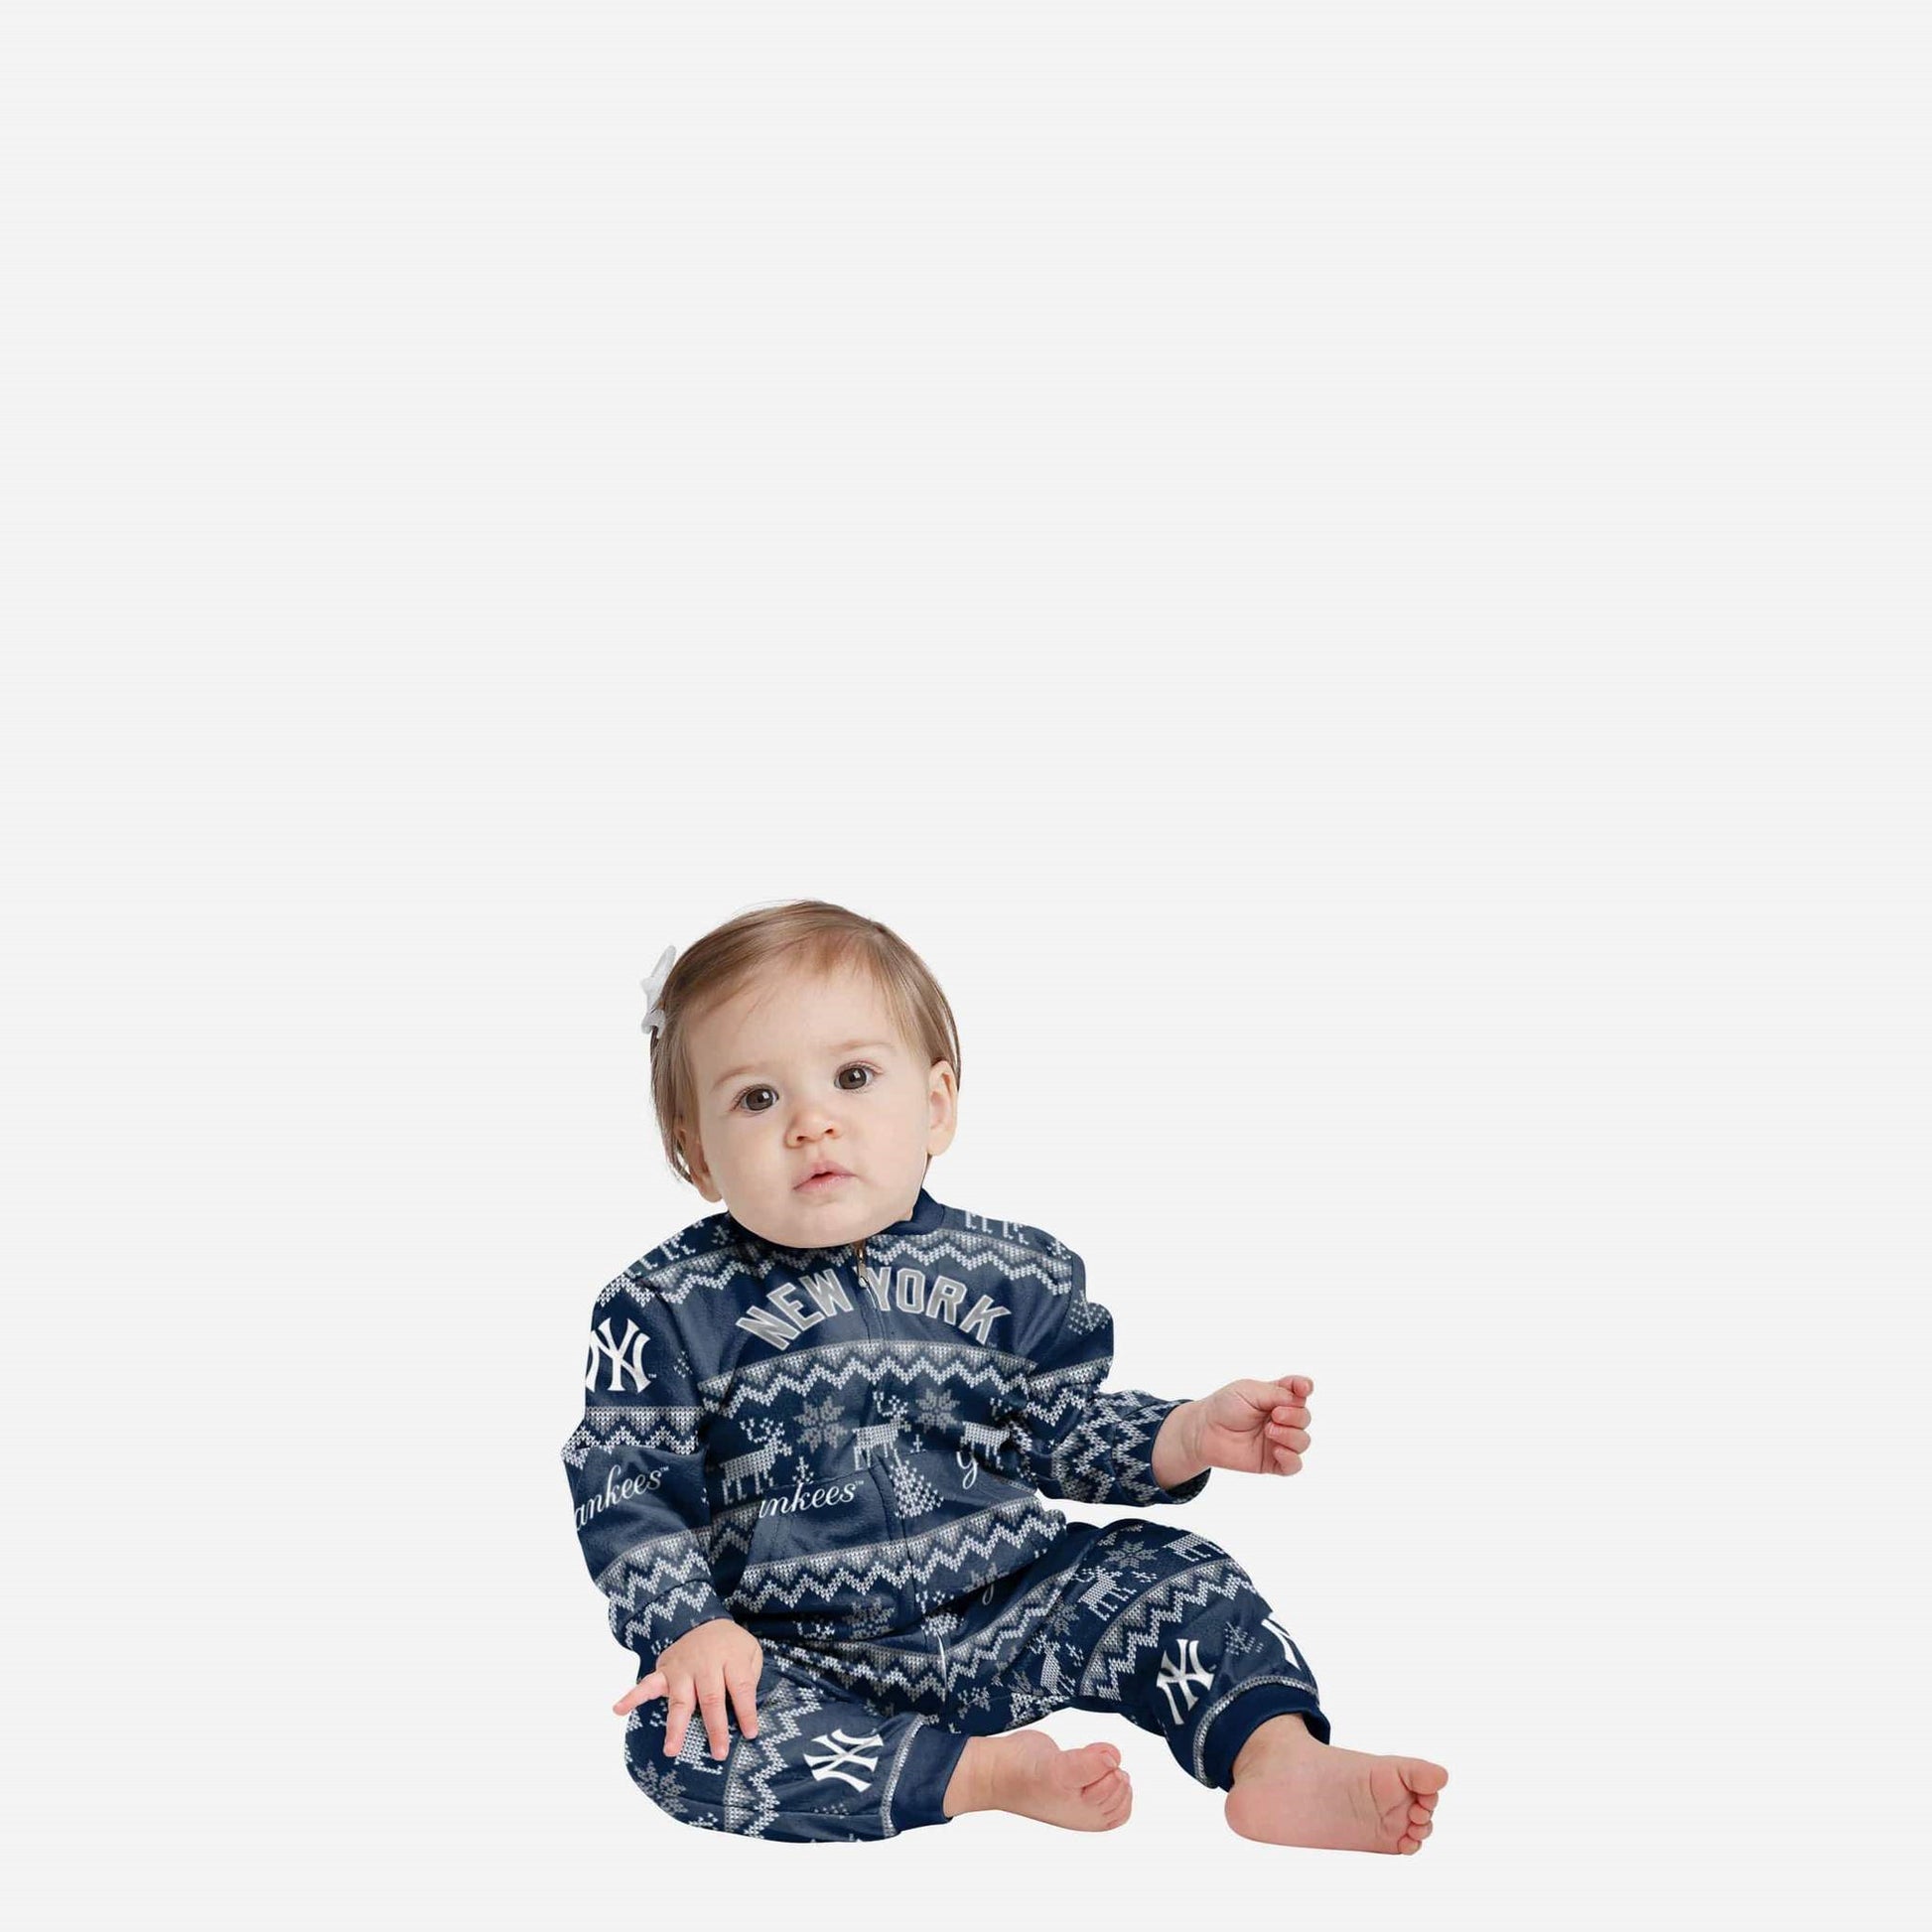 FOCO New York Yankees Infant Ugly Pattern Family Holiday Pajamas, Baby & Toddler Size: 18 Mo